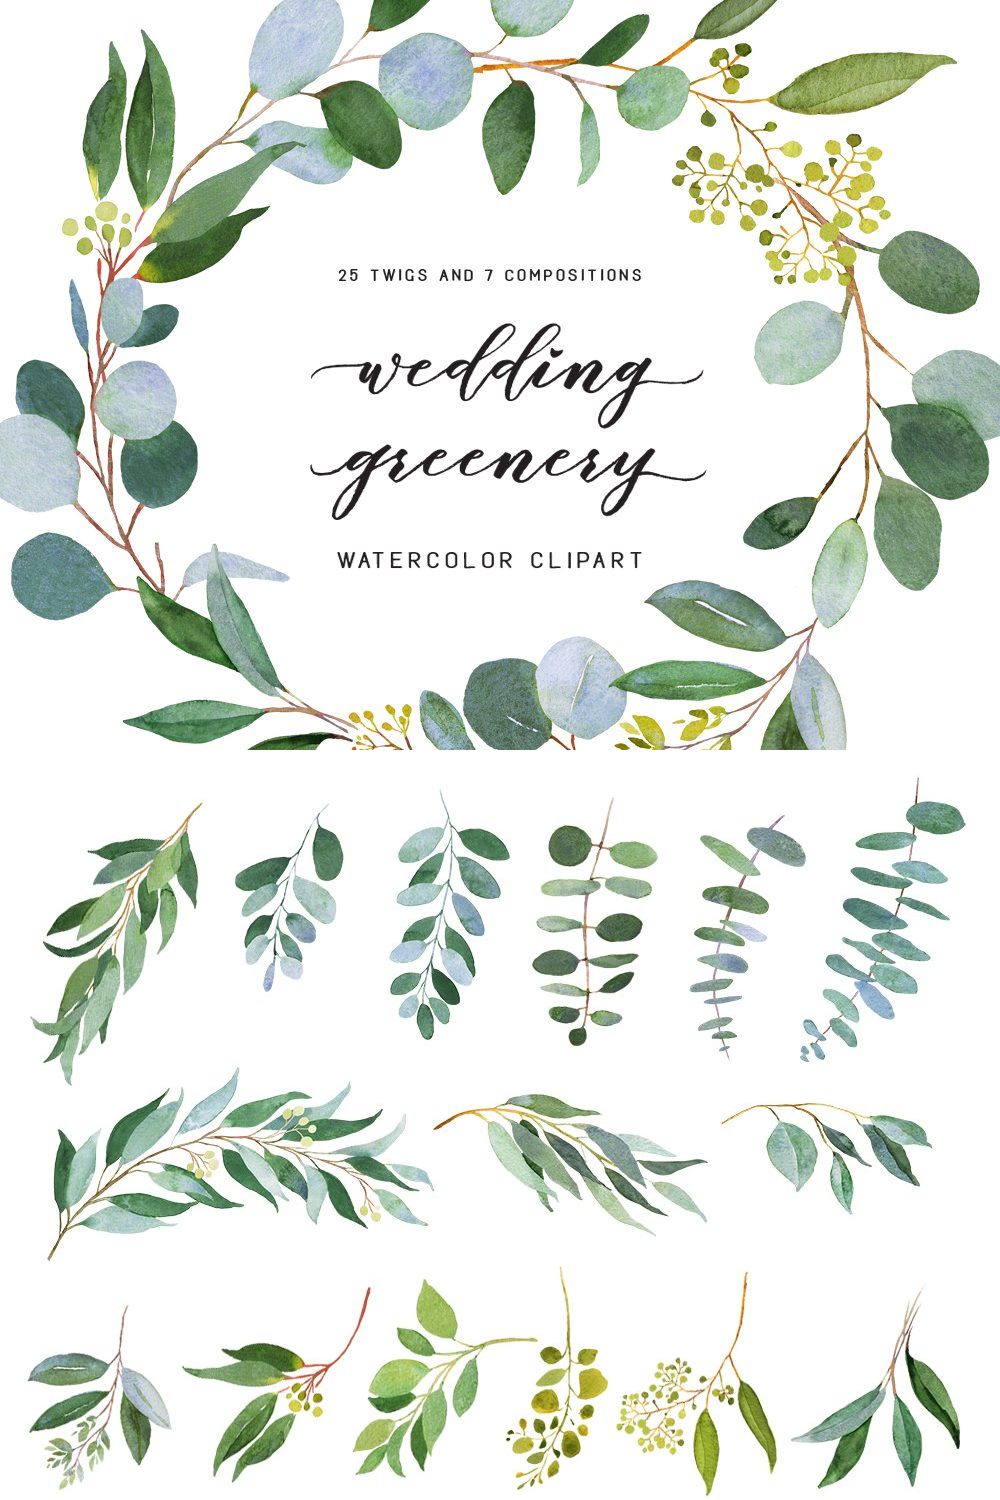 Wedding greenery pinterest preview image.